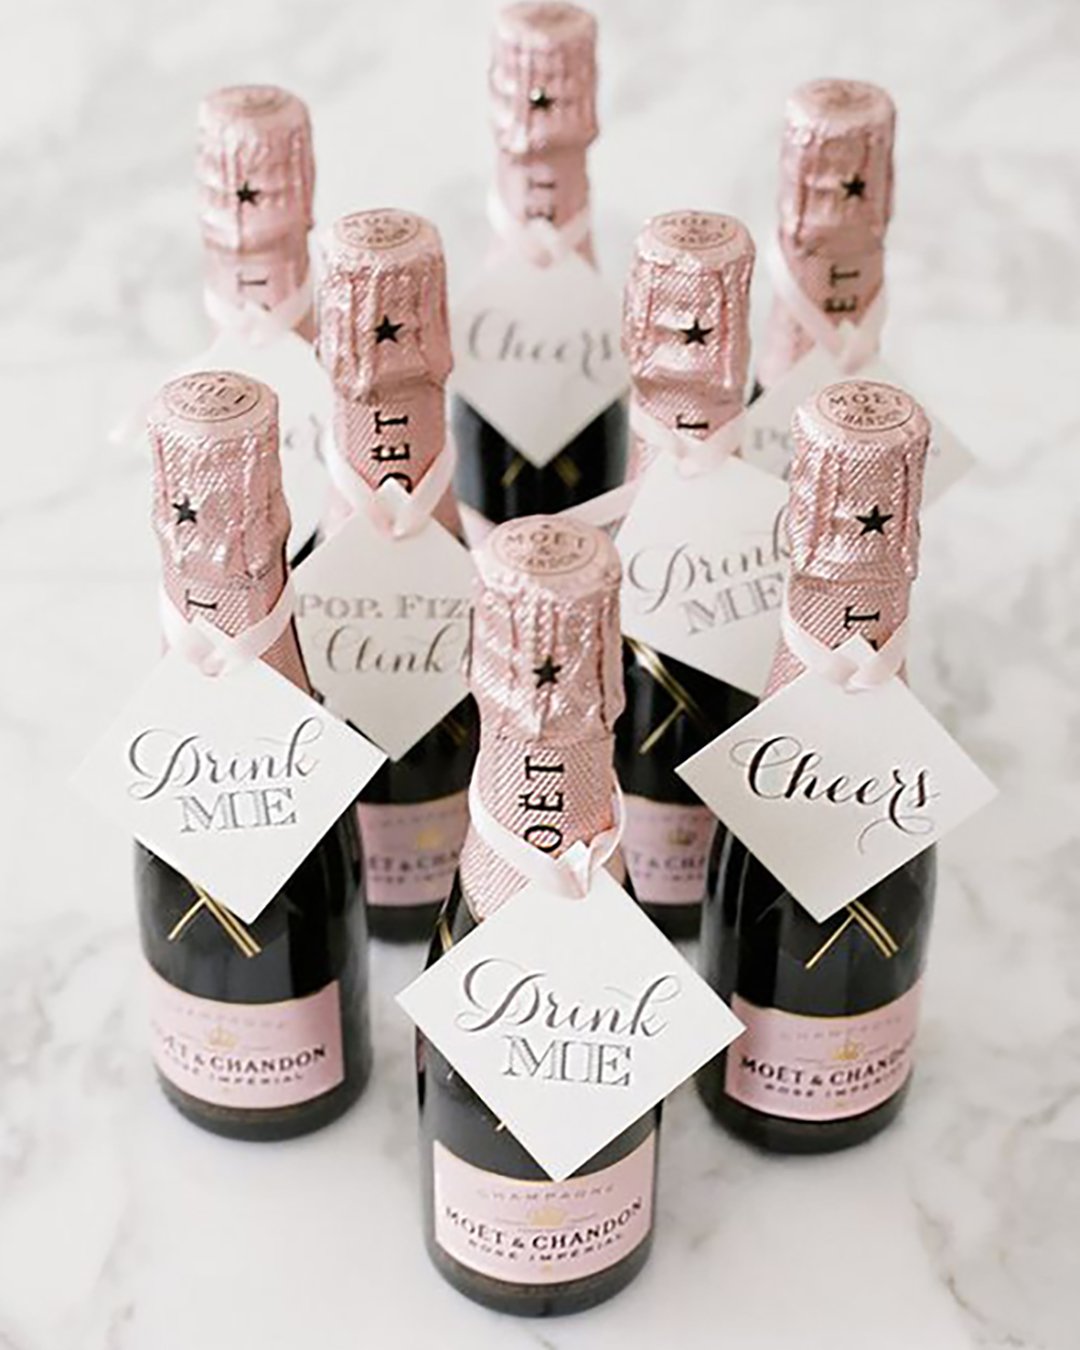 must have wedding photos wedding favors for bridesmaids small cmanpagne bottles leslee mitchell 2